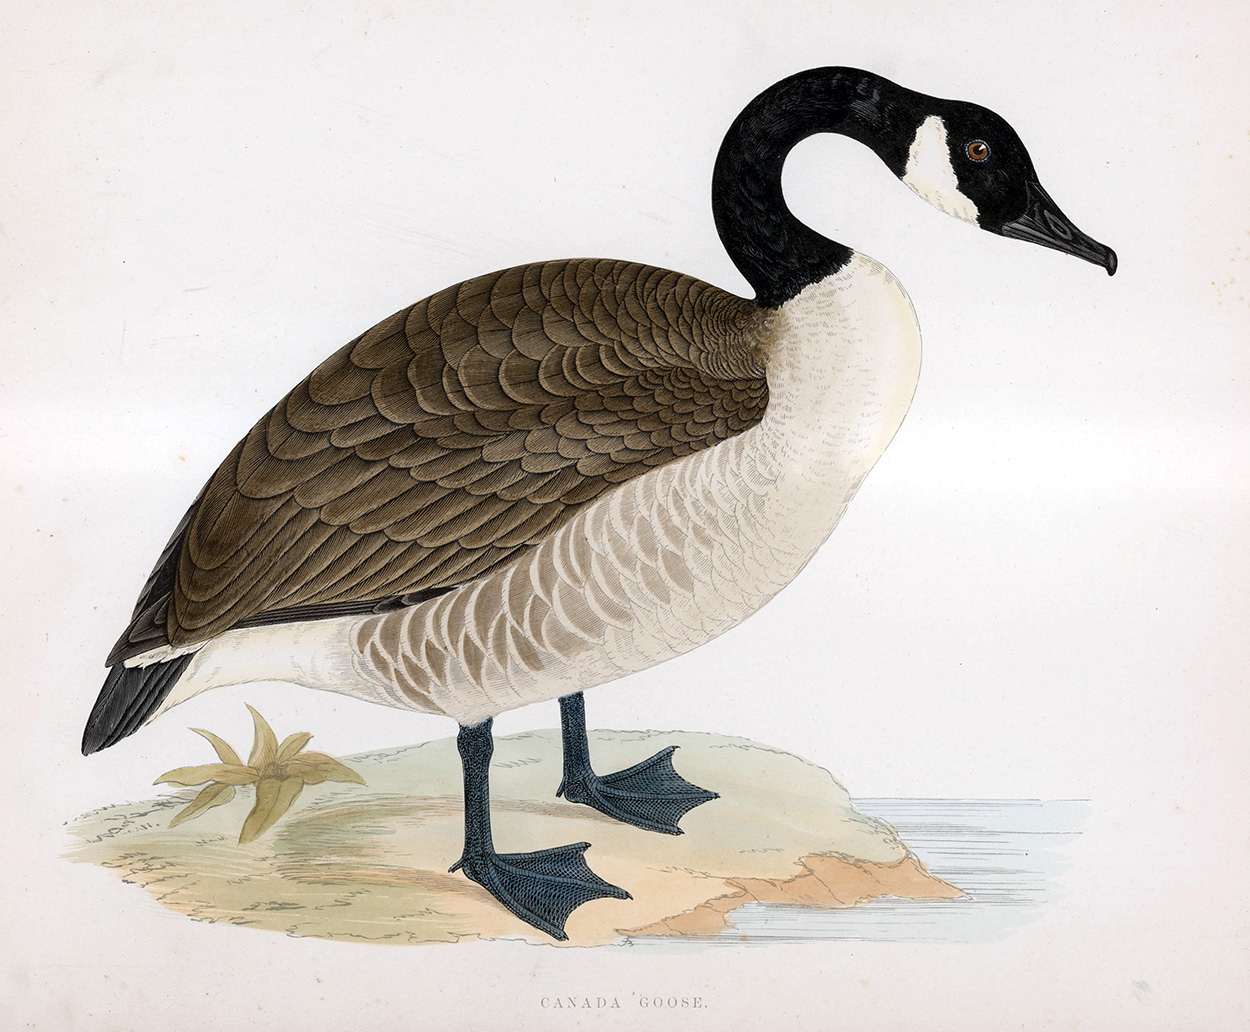 Canada Goose - hand coloured lithograph 1891 (Print) art by Beverley R Morris at The Illustration Art Gallery